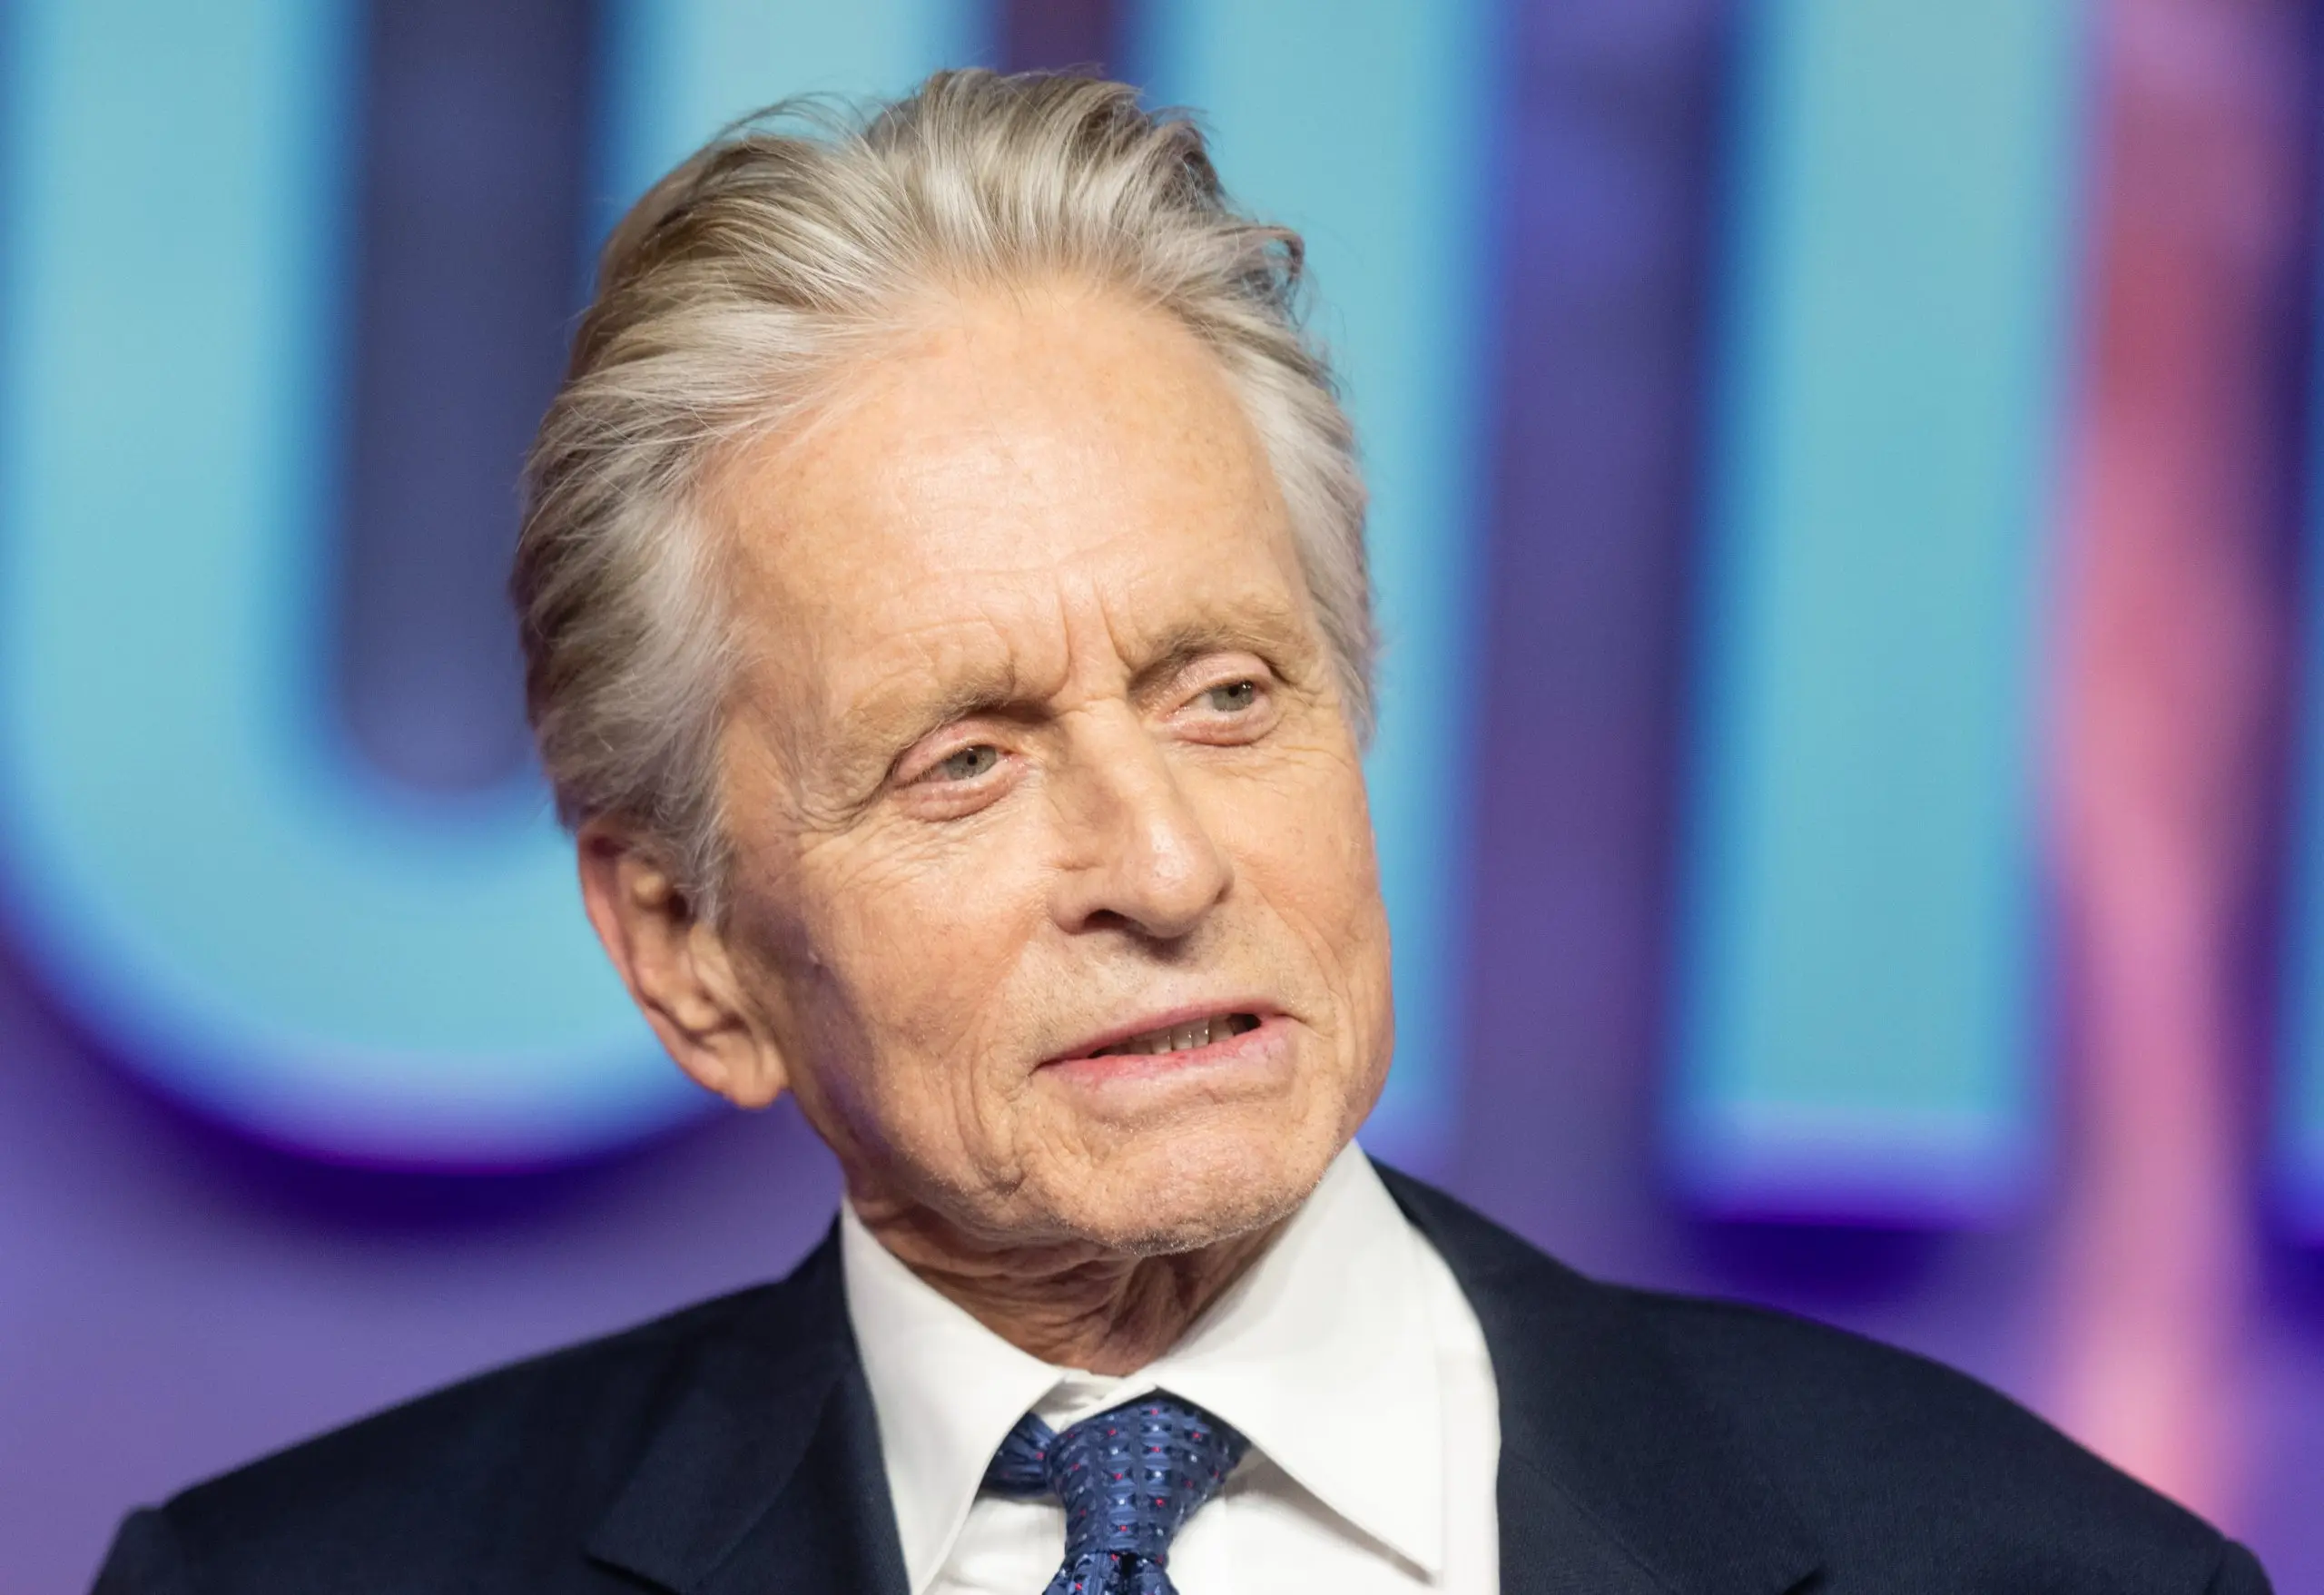 Michael Douglas will be honored at Cannes Film Festival